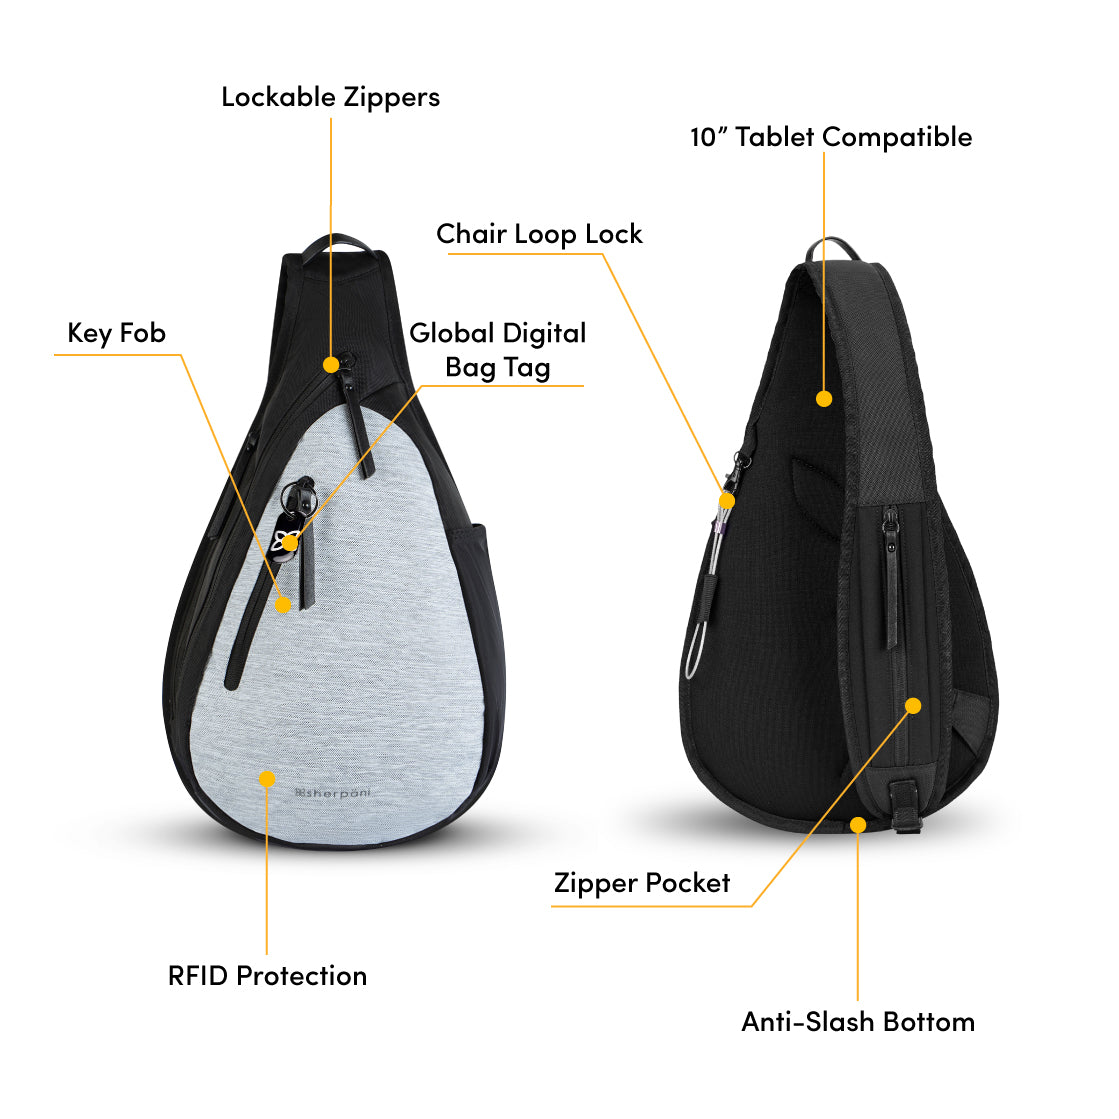 Zipper Locks - Zipper security for travel bags, purses, and backpack zippers